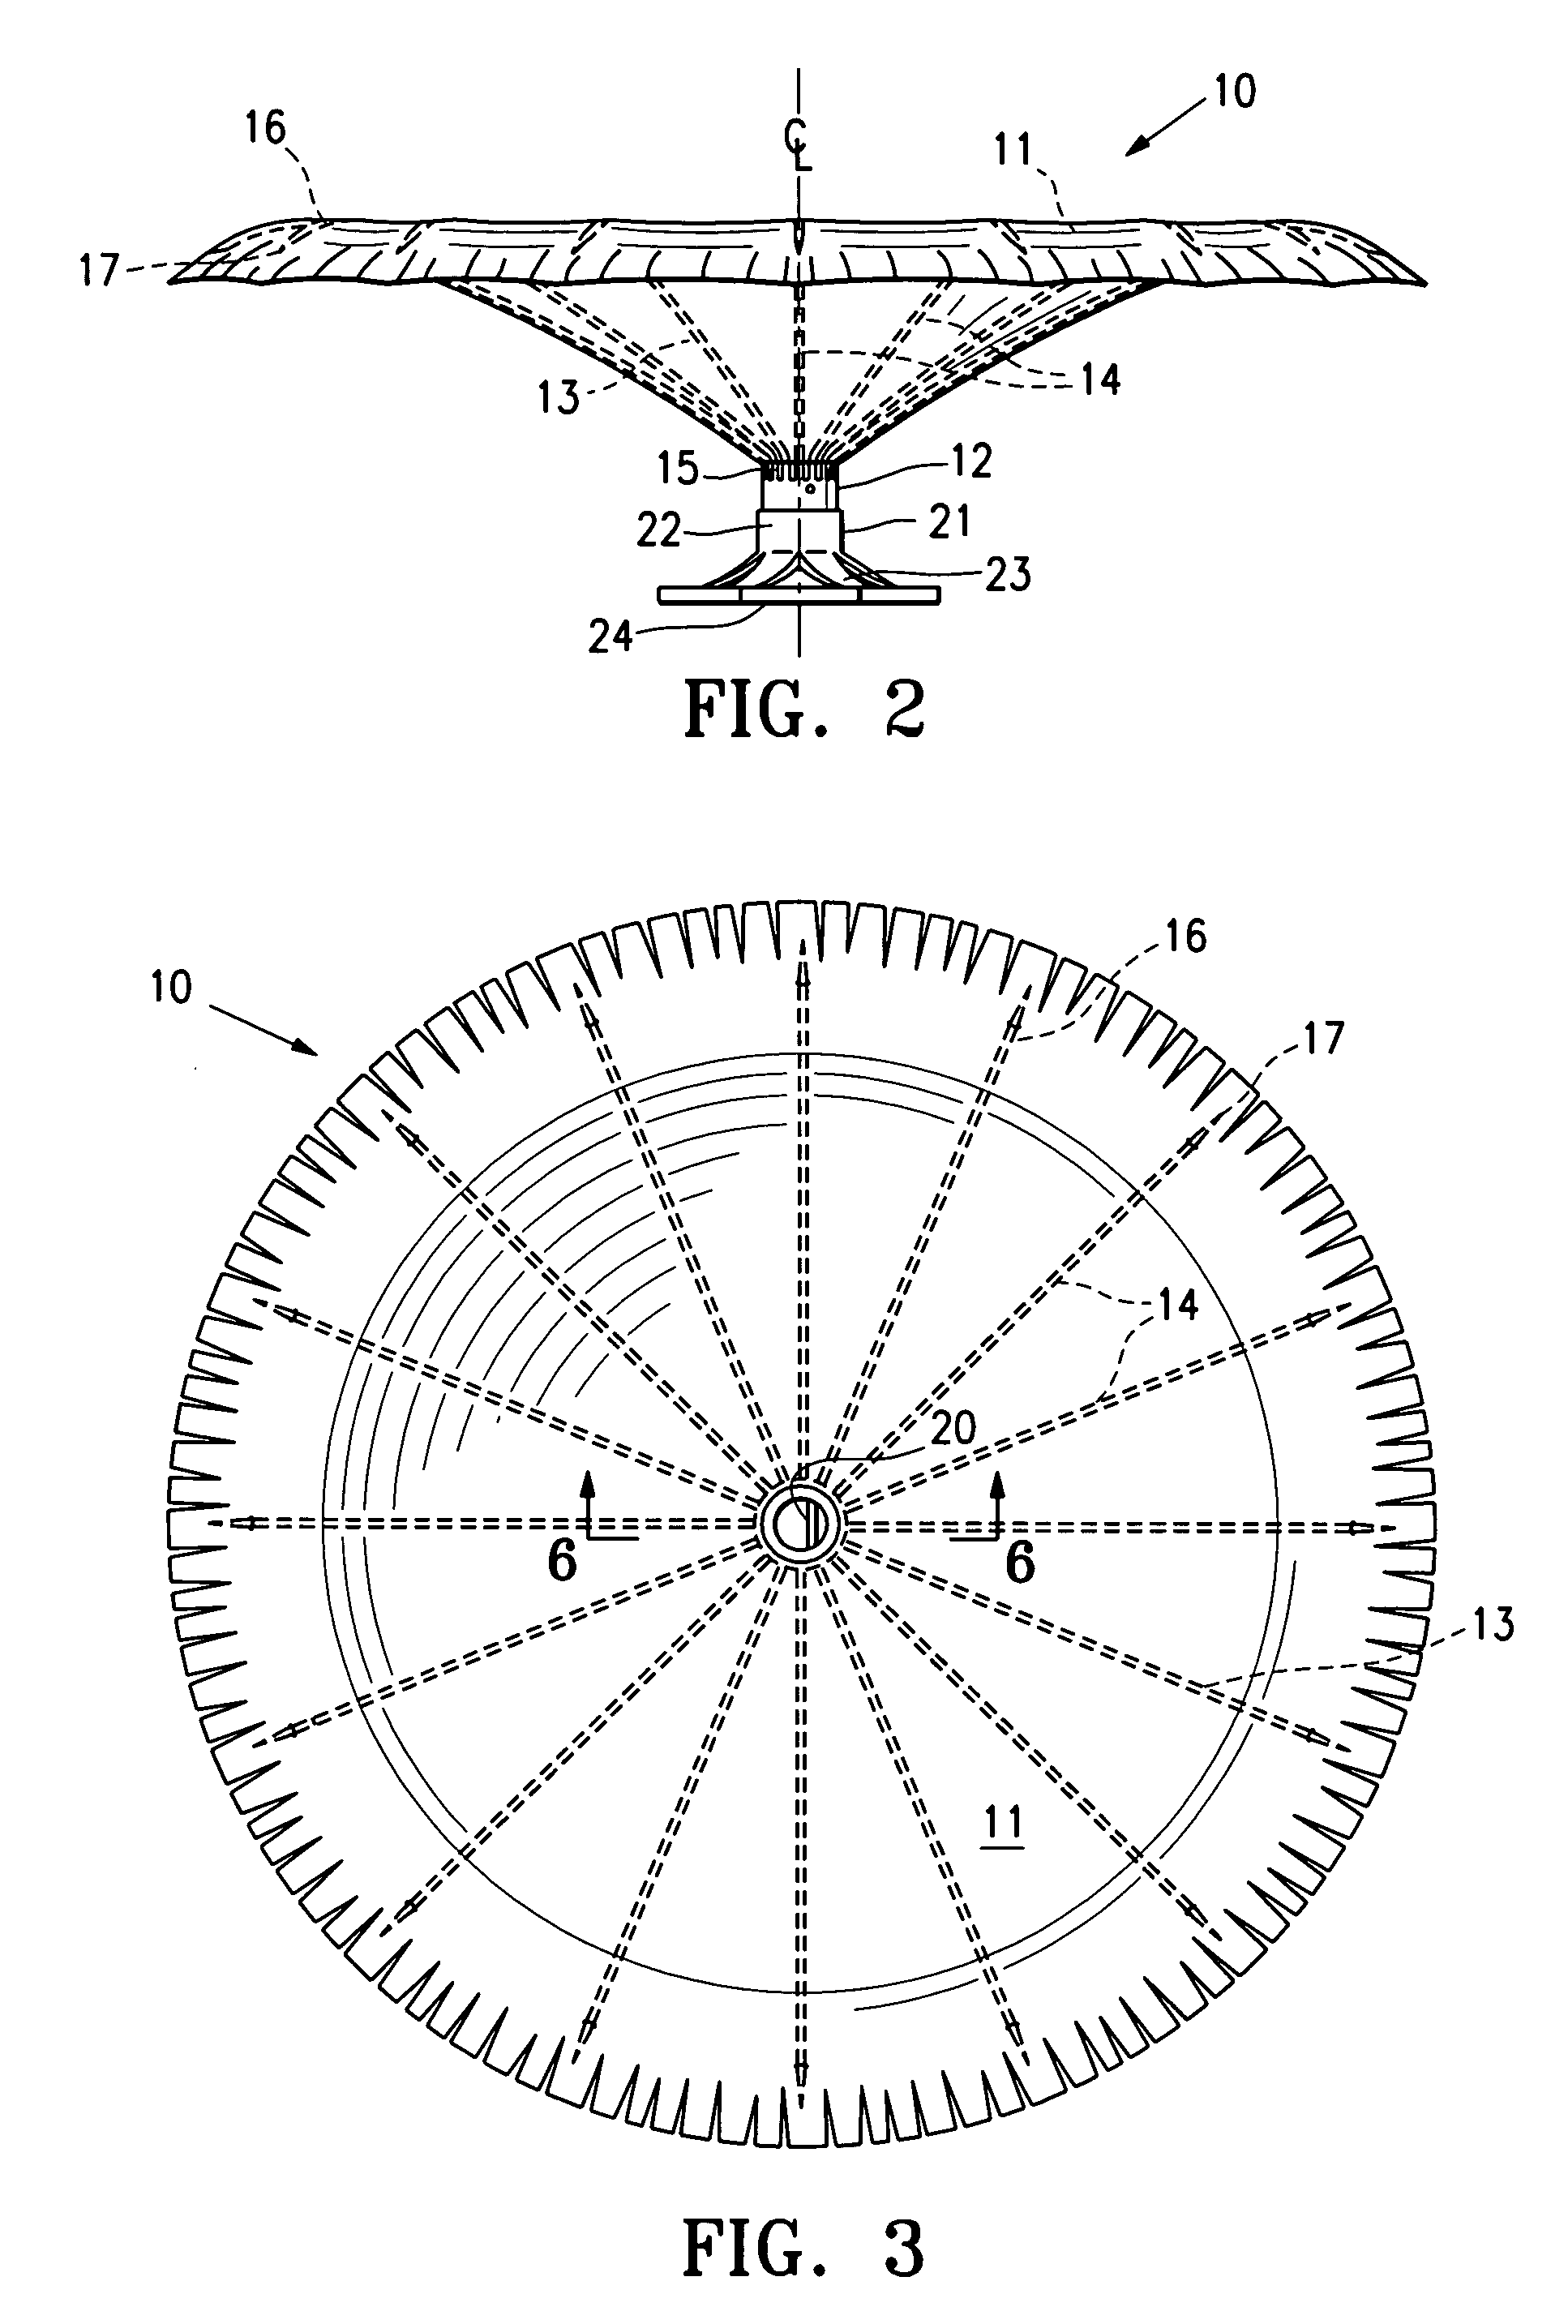 Multiple partitioning devices for heart treatment